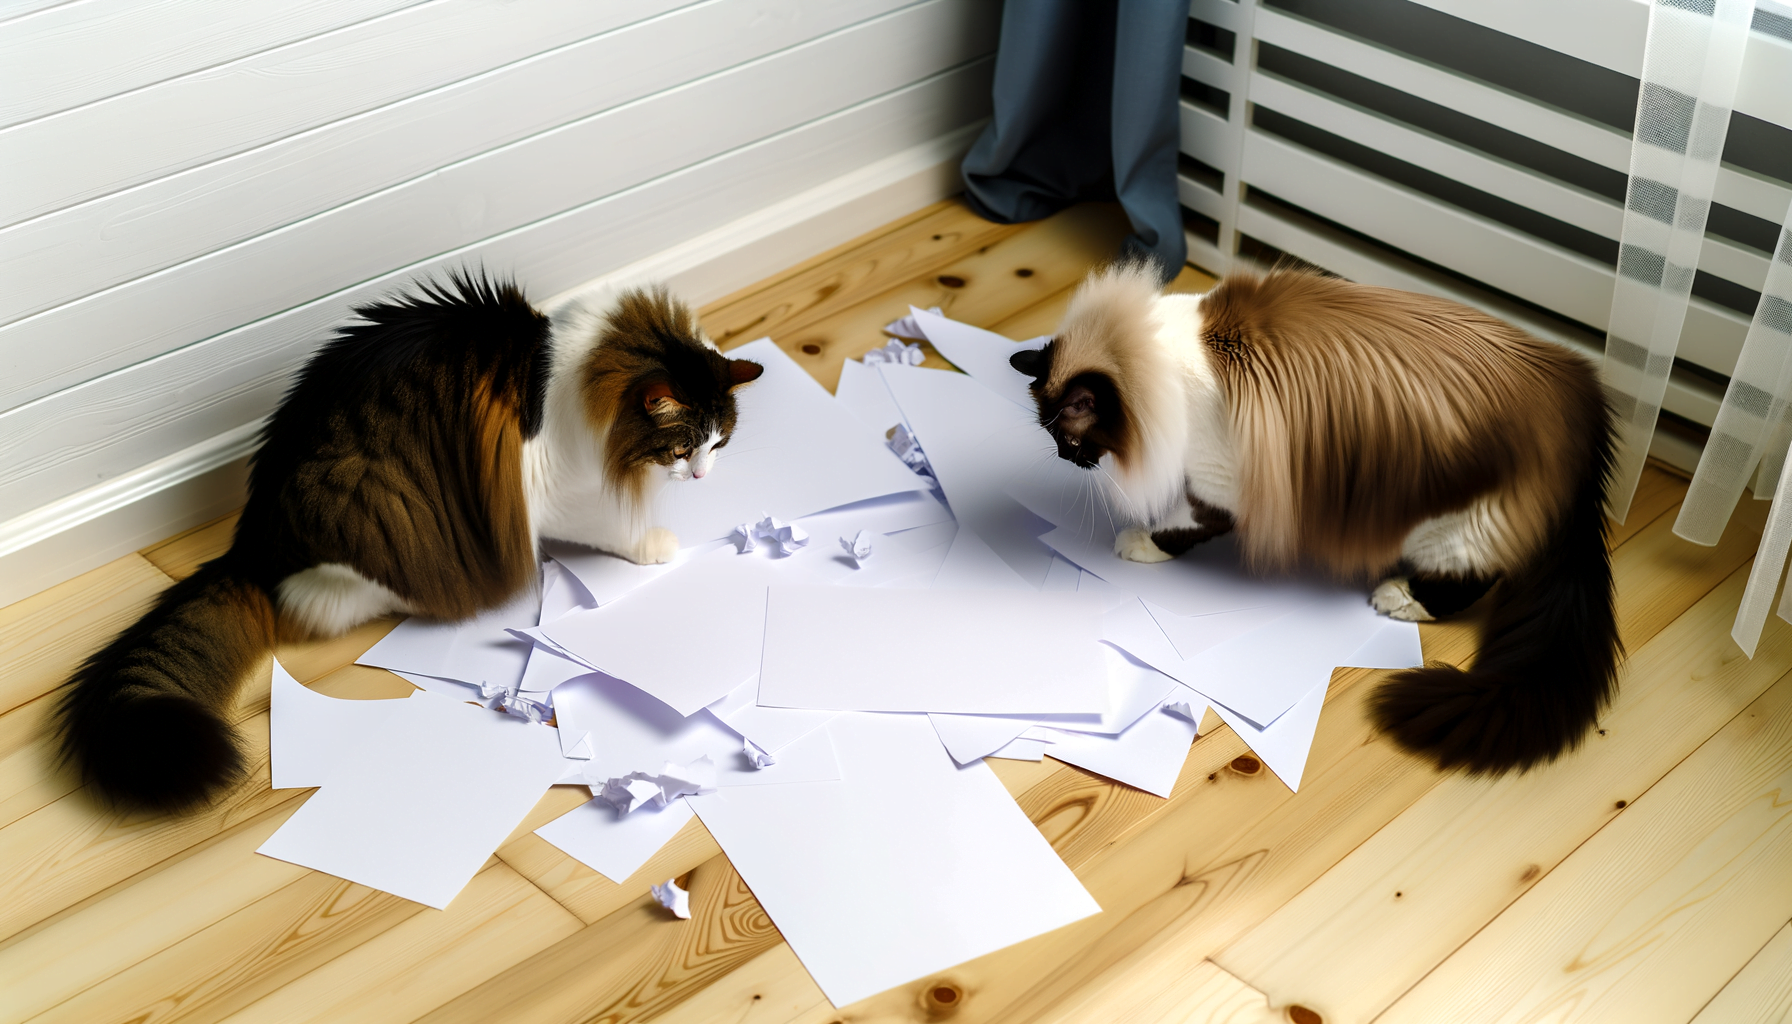 "Decoding Feline Fascination: Why Cats Can't Resist Paper"